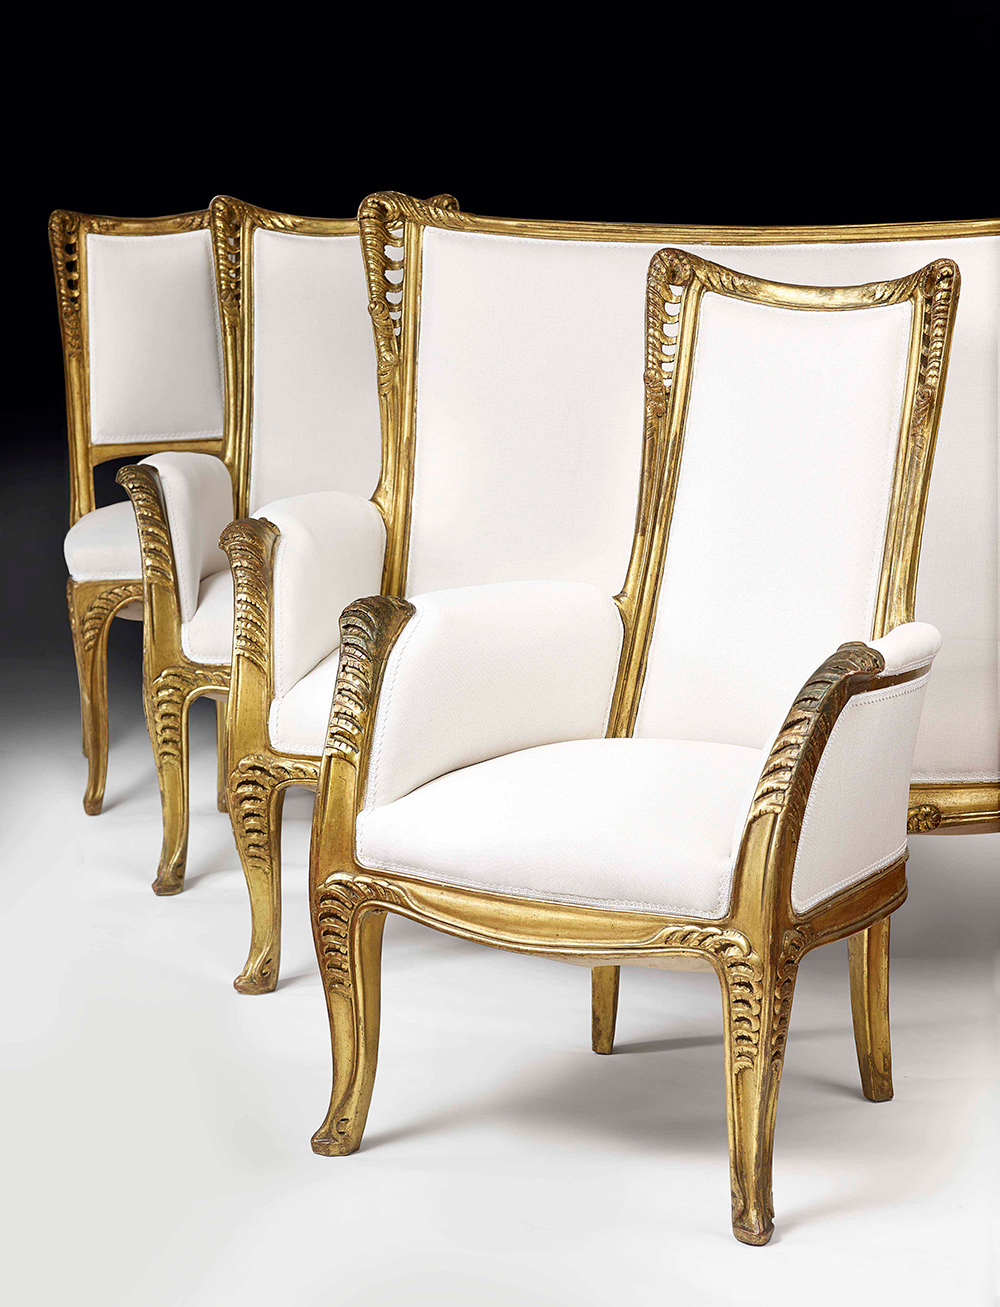 Two armchairs. Стулья поздний Модерн. A Fine and rare Set comprising two Armchairs and two Chairs in Carved and Gilded Wood. Ombellifere.